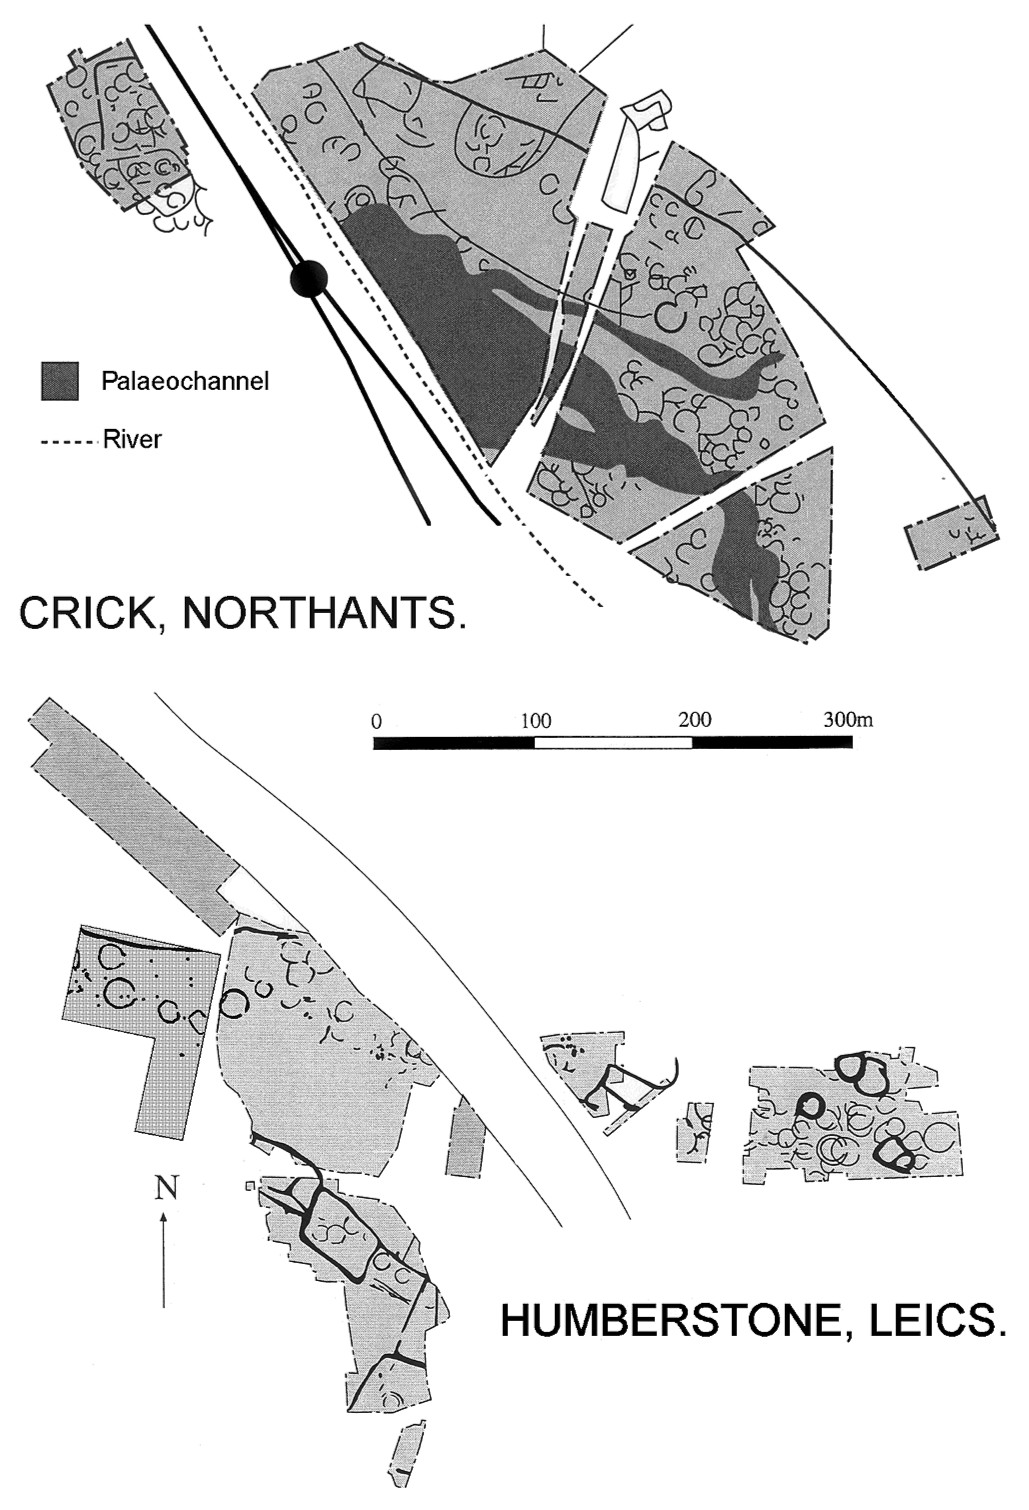 Diagrammatic representations of two archaeological sites - Crick, Northants and Humberston, Leics. Both sites are roughly 500m across and contain a large number of small circular structures.